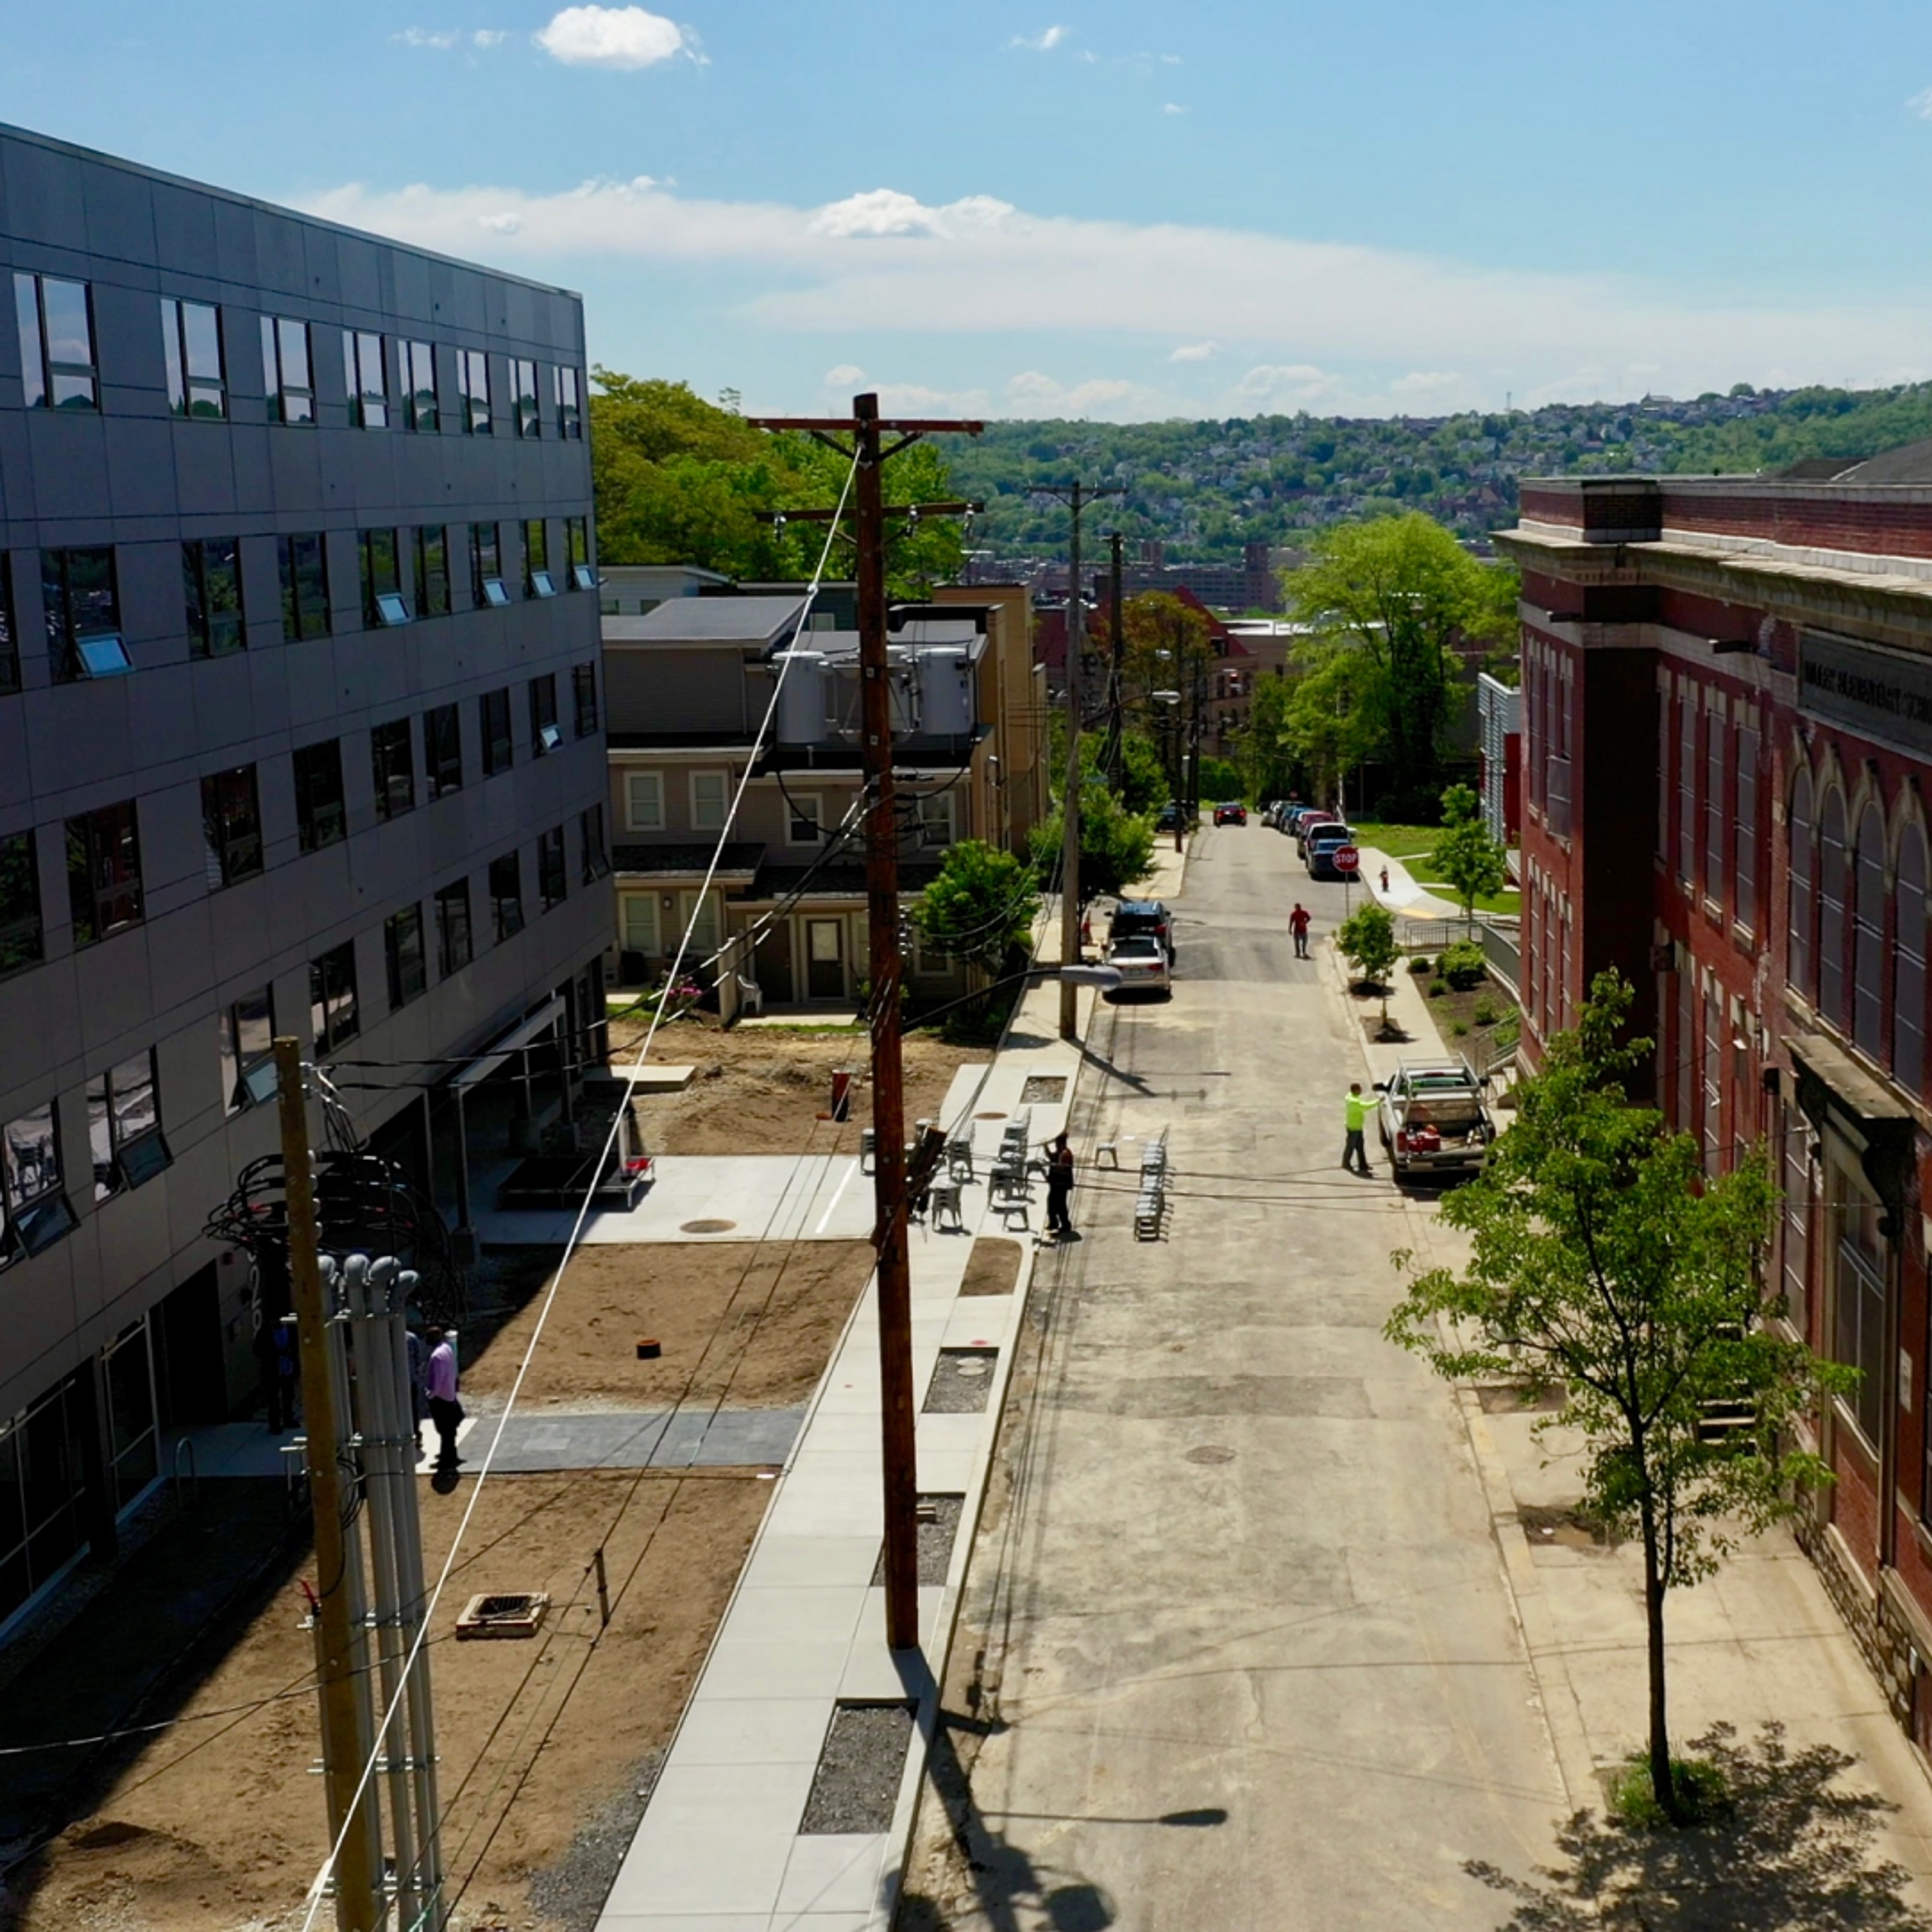 The completed Miller Street Apartments (left) are located right across the street from BTG's upcoming Miller School project (right)